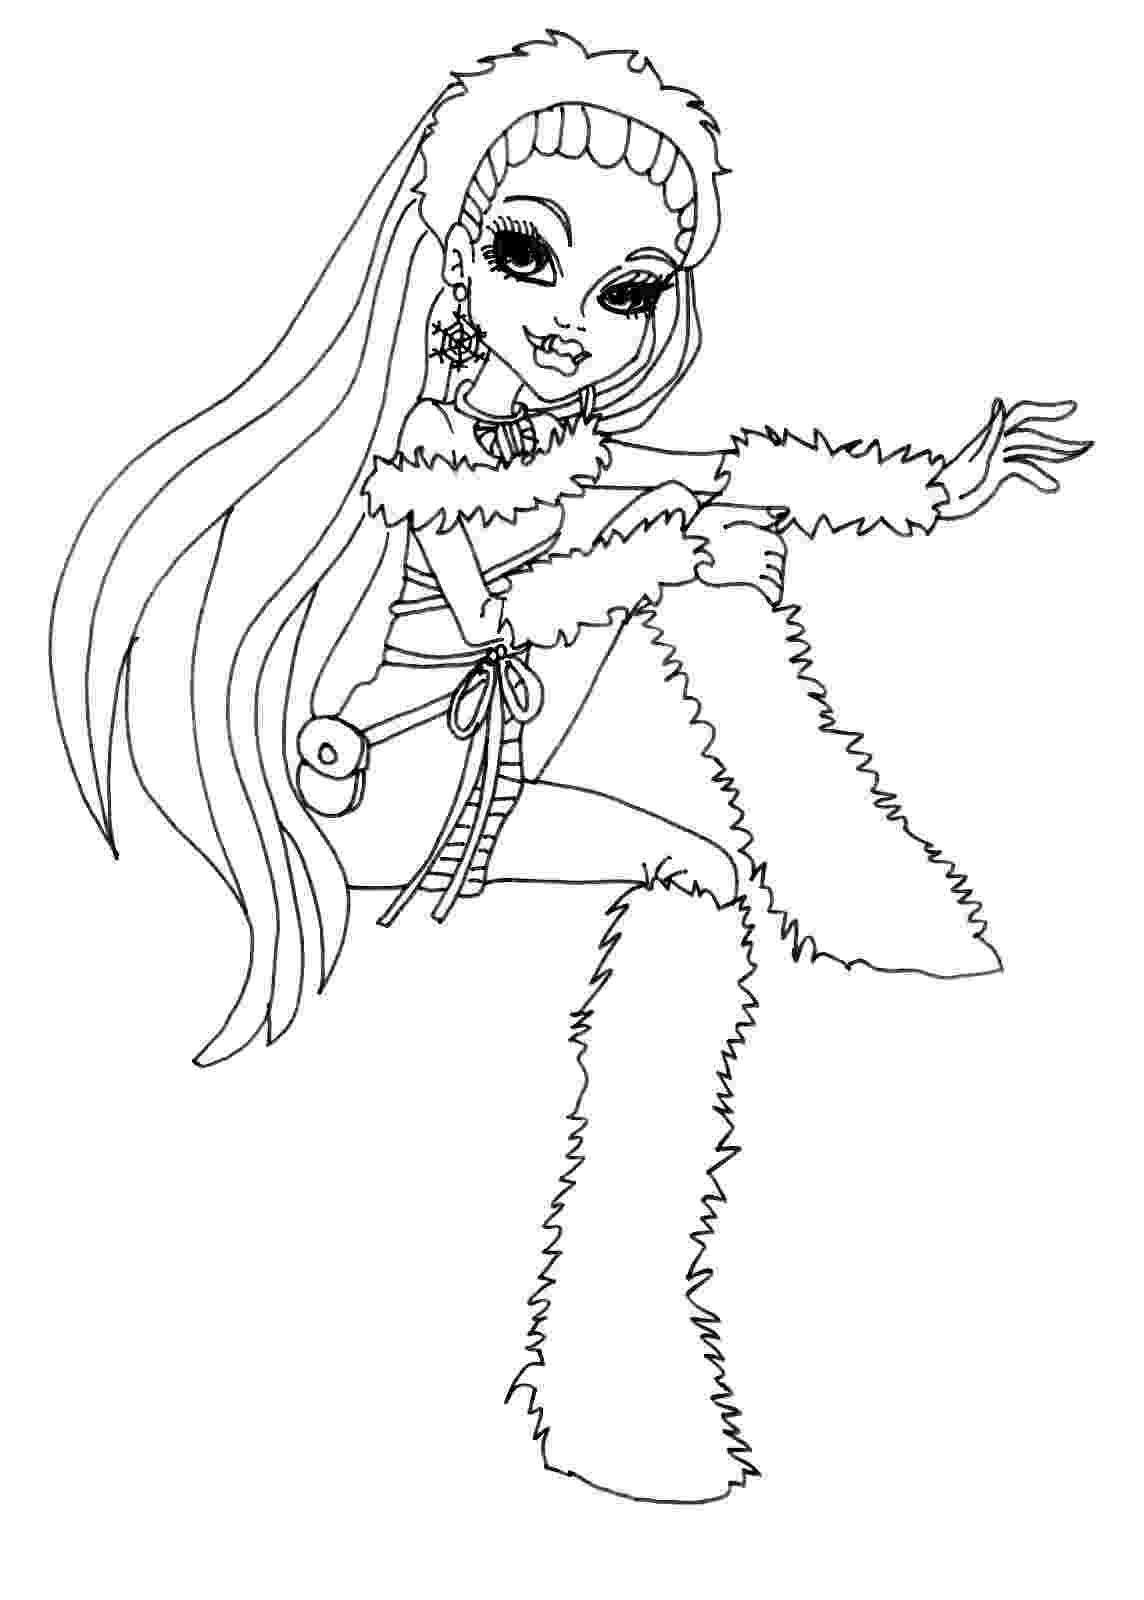 coloring pages for older girls coloring pages for 8910 year old girls to download and pages older girls coloring for 